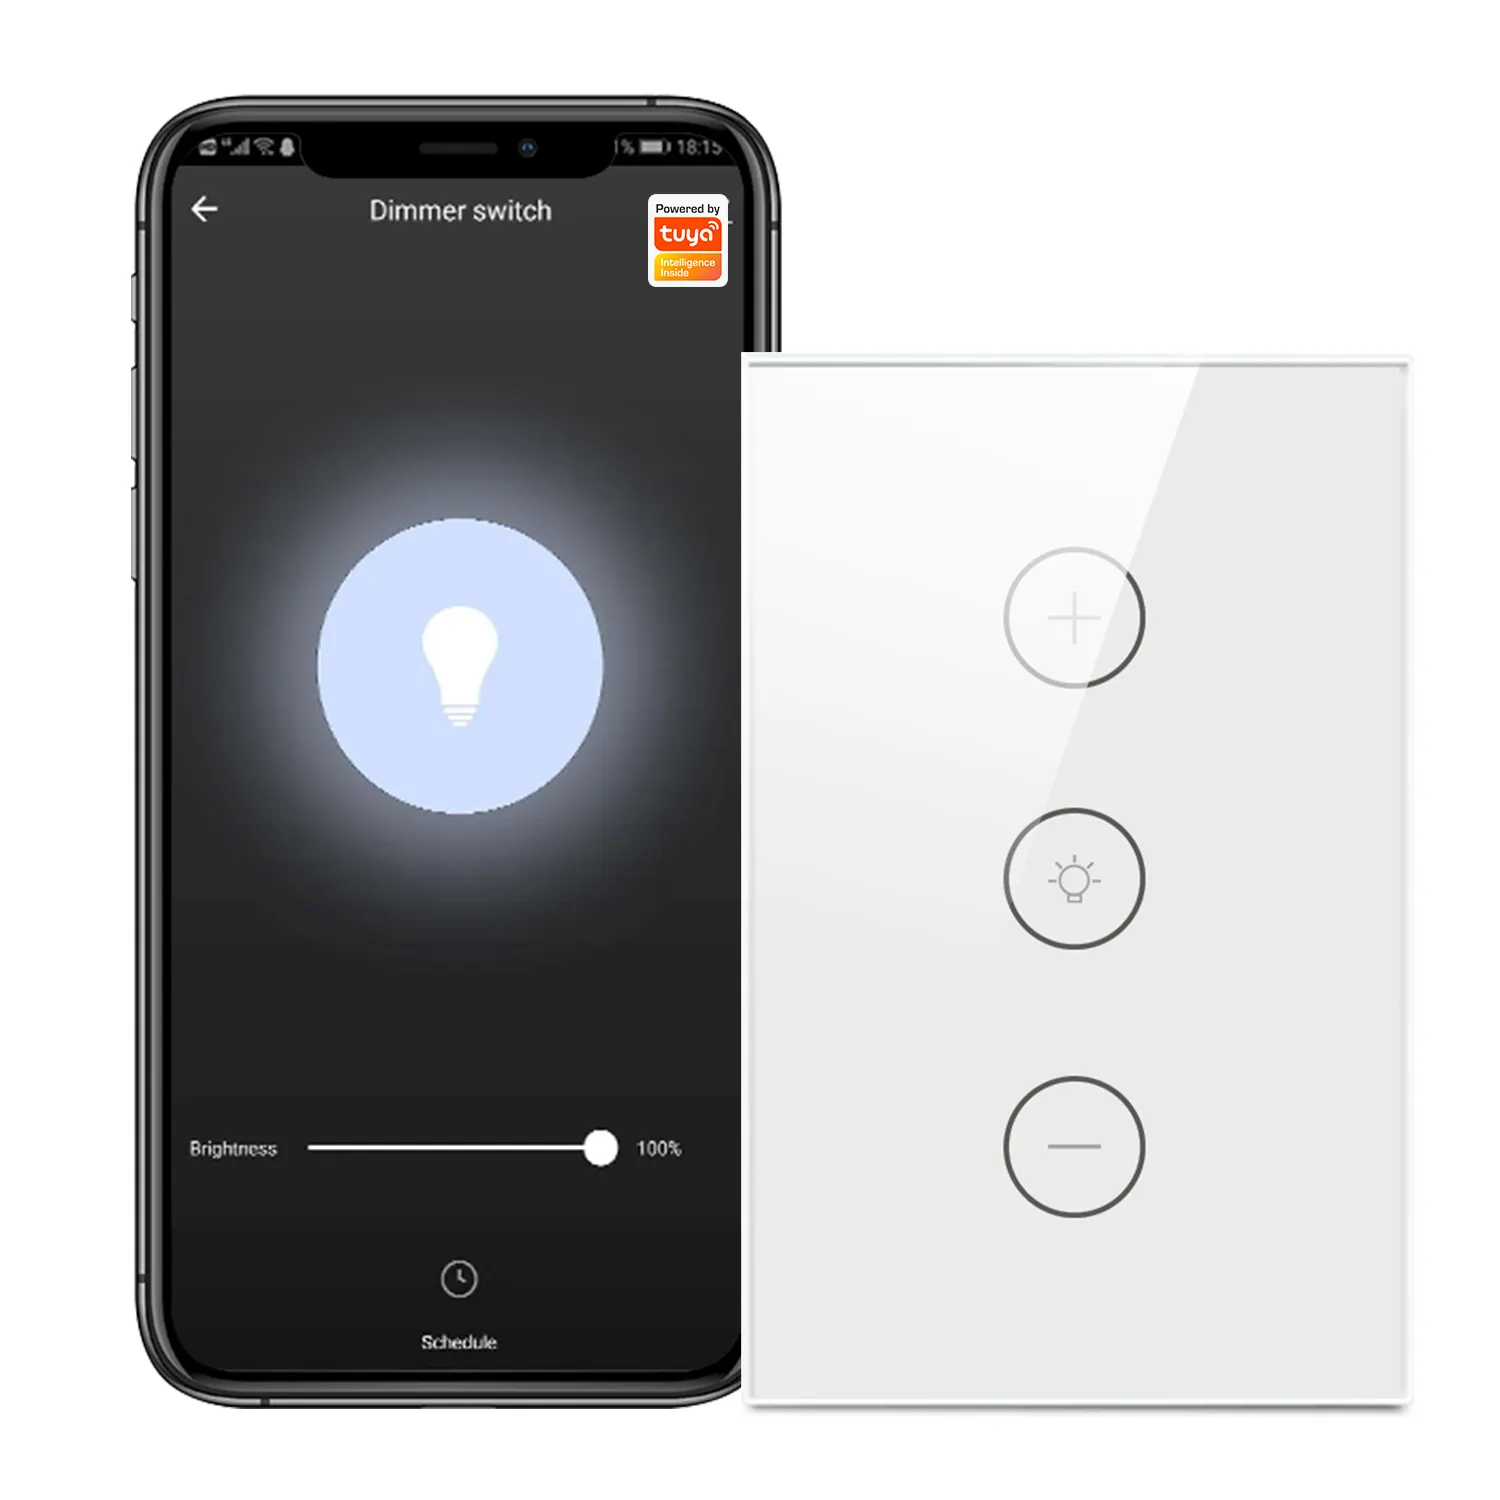 SMATRUL Tuya Smart Life WiFi Touch Dimmer Switch LED Light APP US 220V 110V Wireless Timer Remote Control with Alexa Google Home